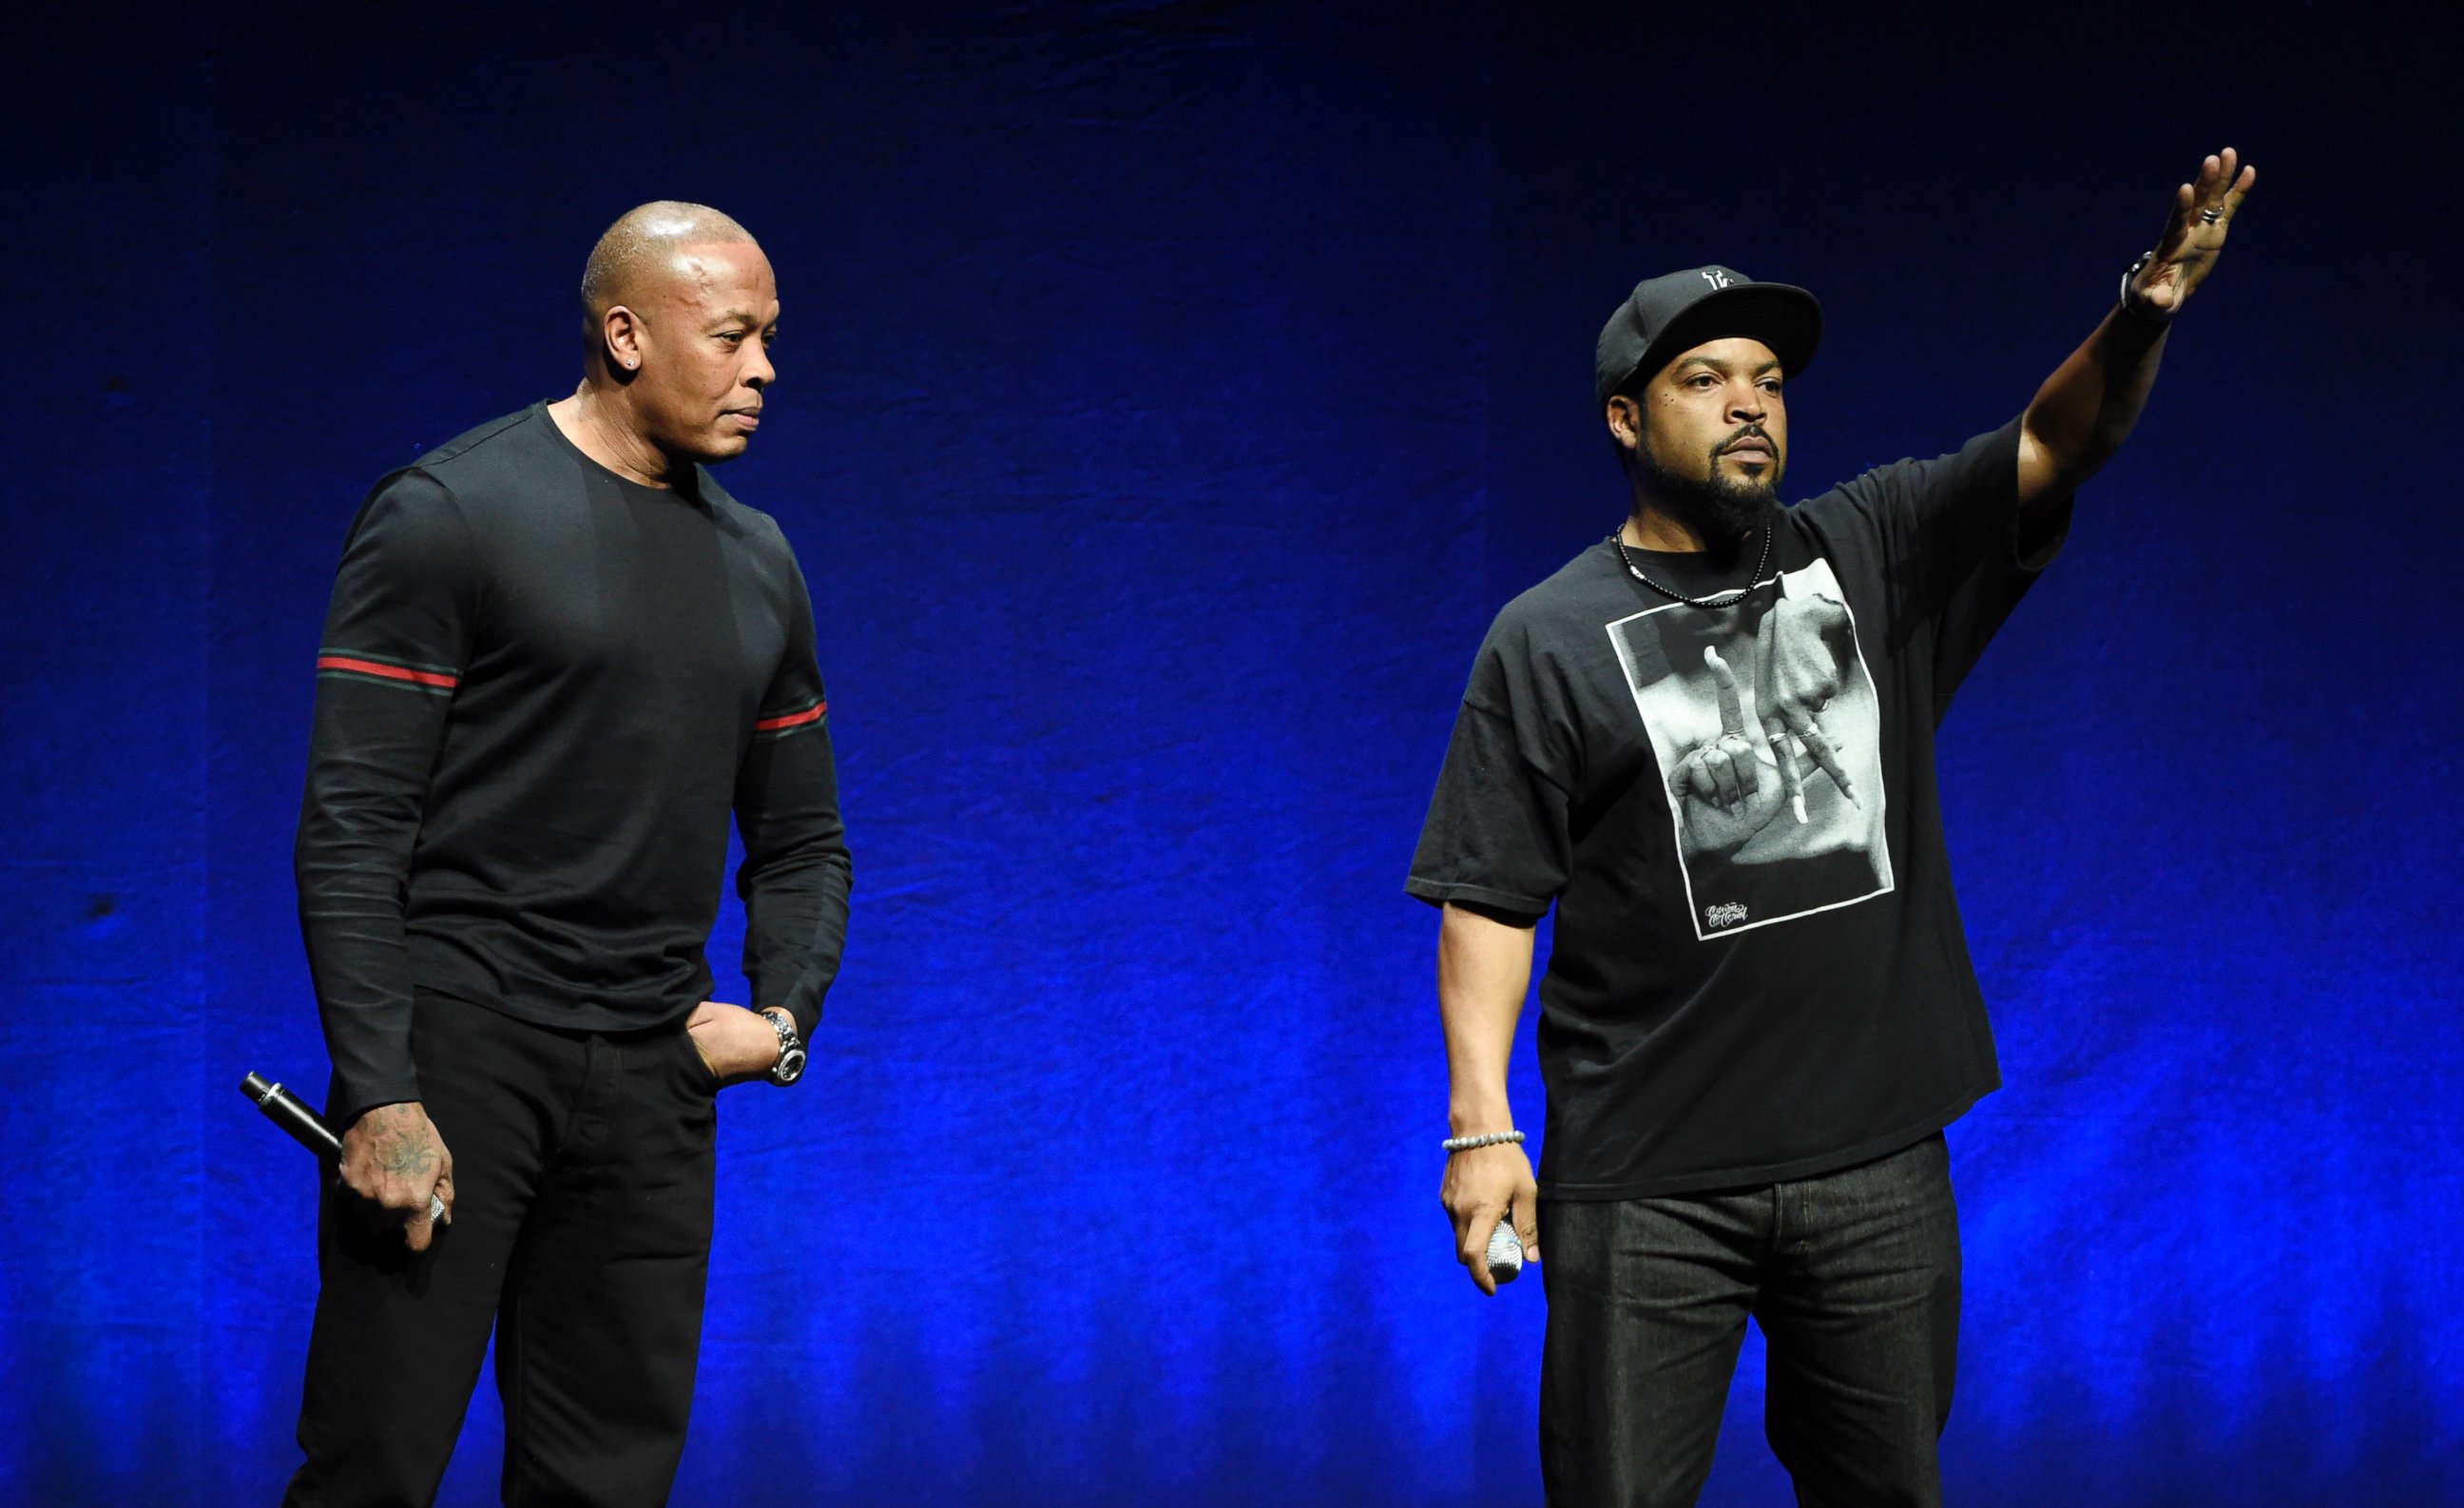 PHOTO: N.W.A. members Dr. Dre, left, and Ice Cube, appear onstage in Las Vegas, April 23, 2015.